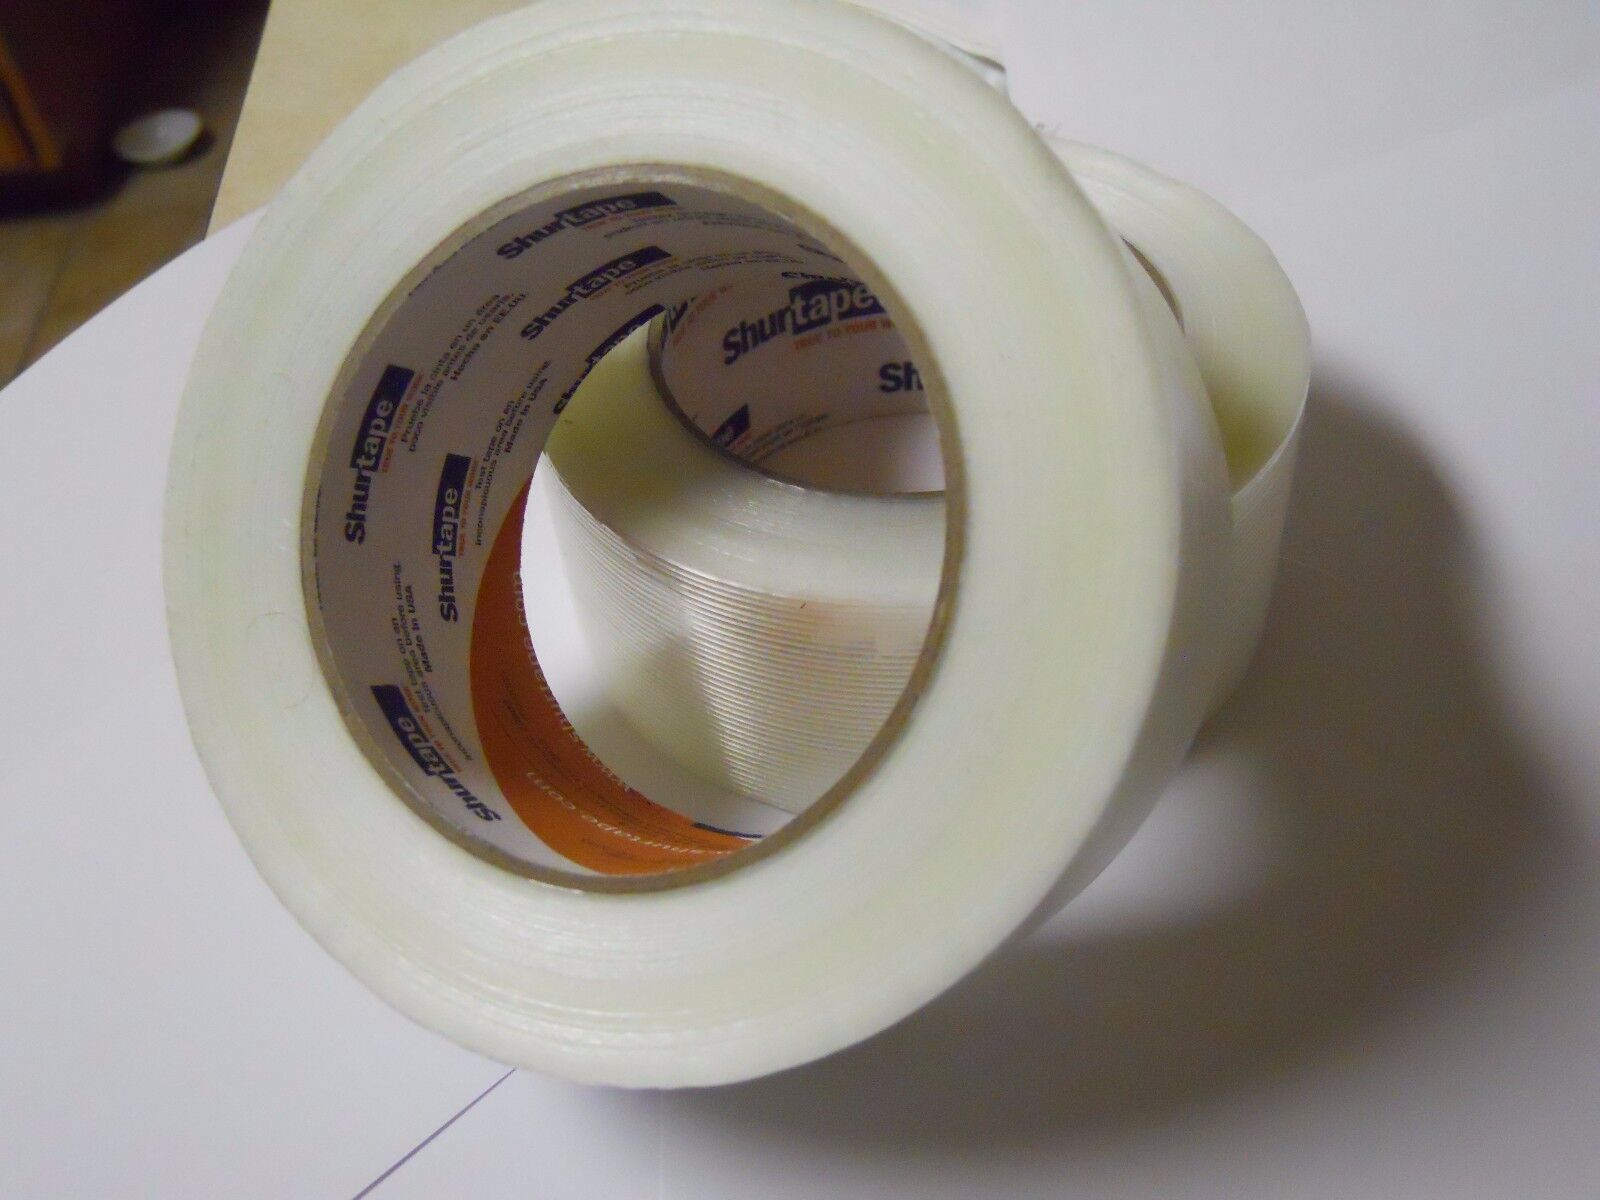 7 Rolls 2" x 60 YDS Fiberglass Reinforced Filament Strapping, Packing Tape Clear Unbranded/Generic Does Not Apply - фотография #5